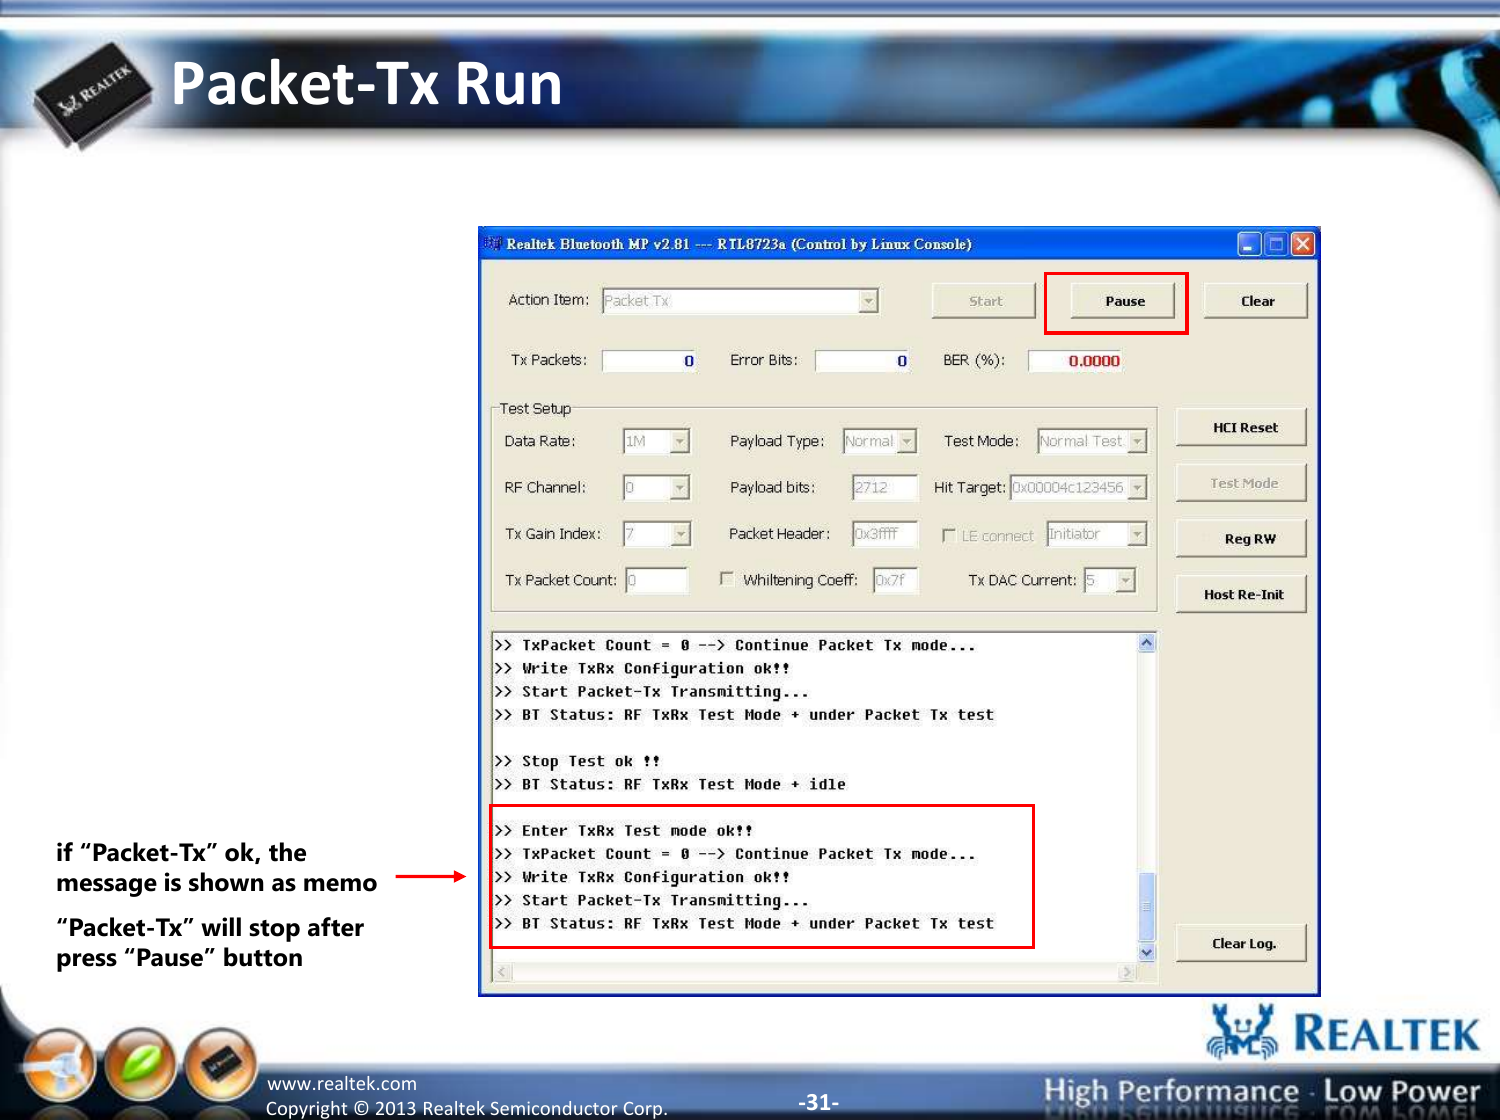 -31- Copyright ©  2013 Realtek Semiconductor Corp. www.realtek.com Packet-Tx Run if “Packet-Tx” ok, the message is shown as memo “Packet-Tx” will stop after press “Pause” button 